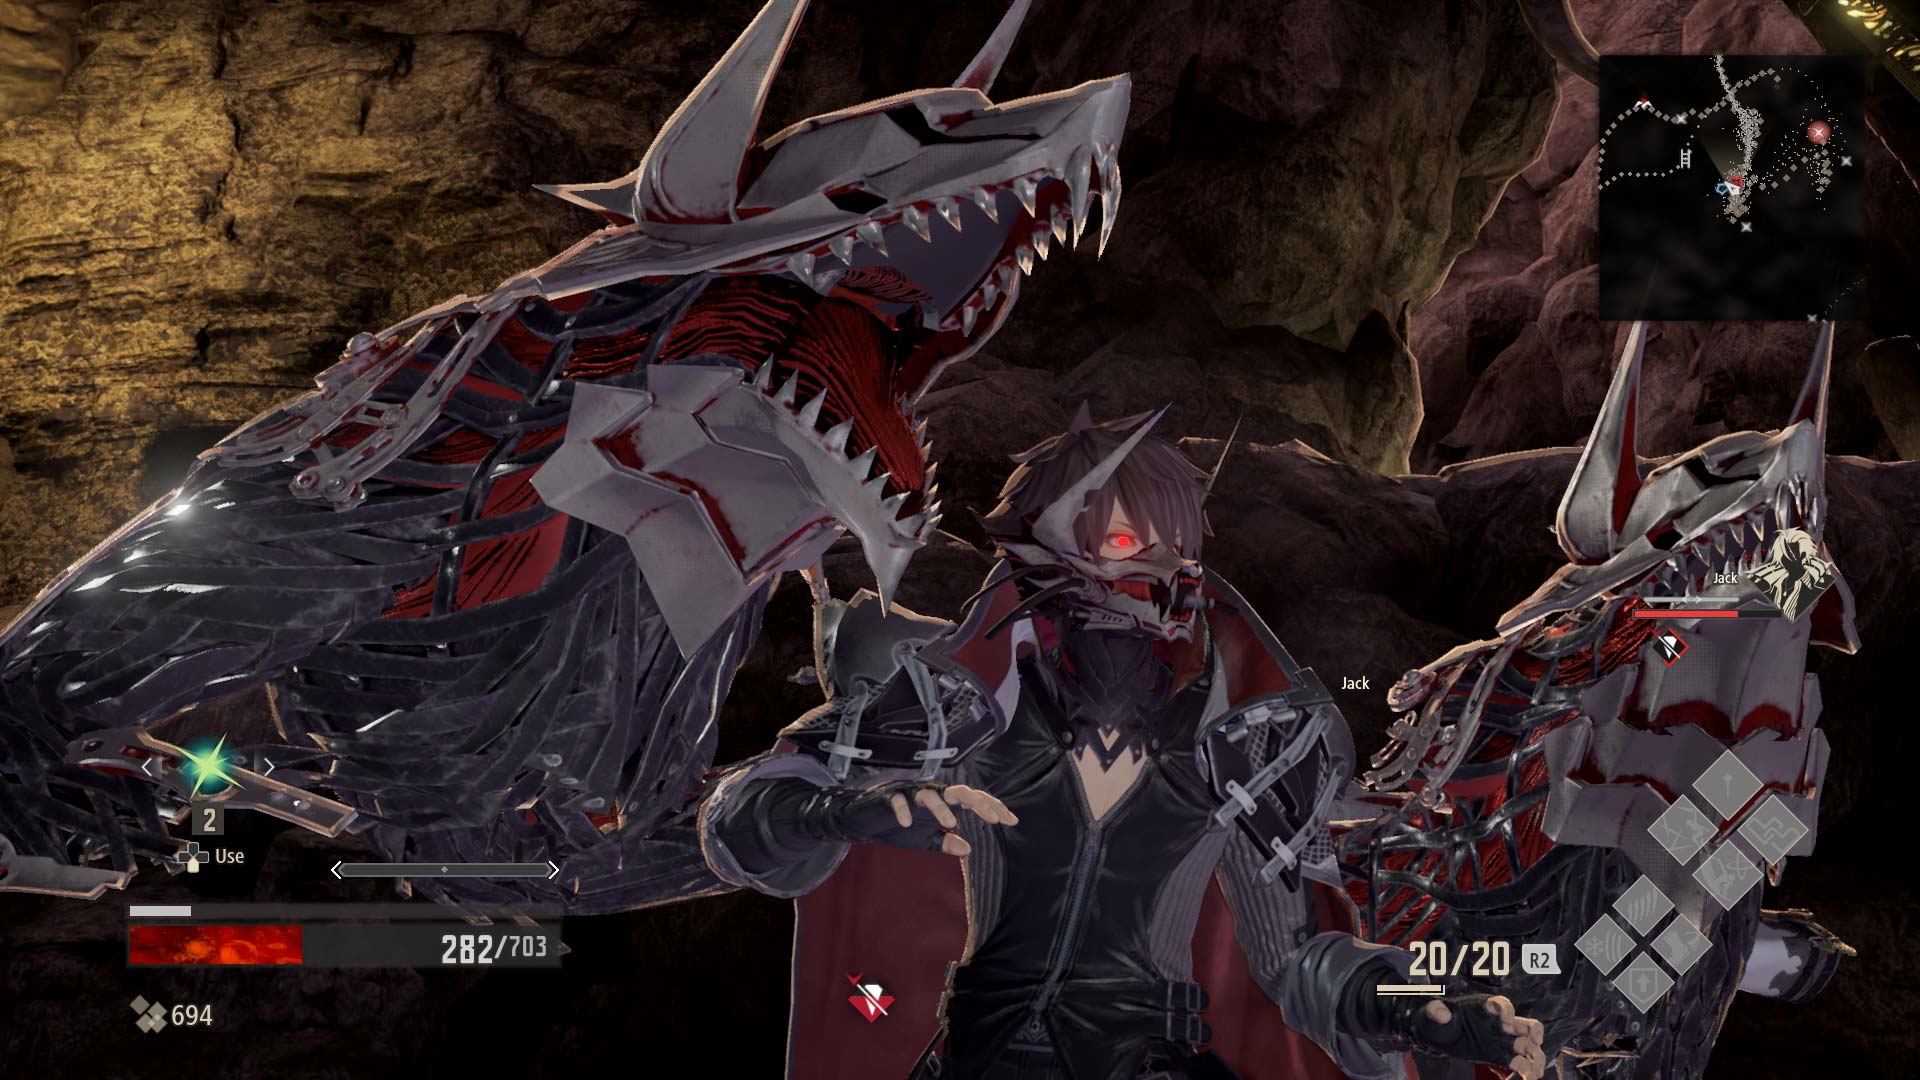 Code Vein Releases New Snippet of Gameplay - mxdwn Games